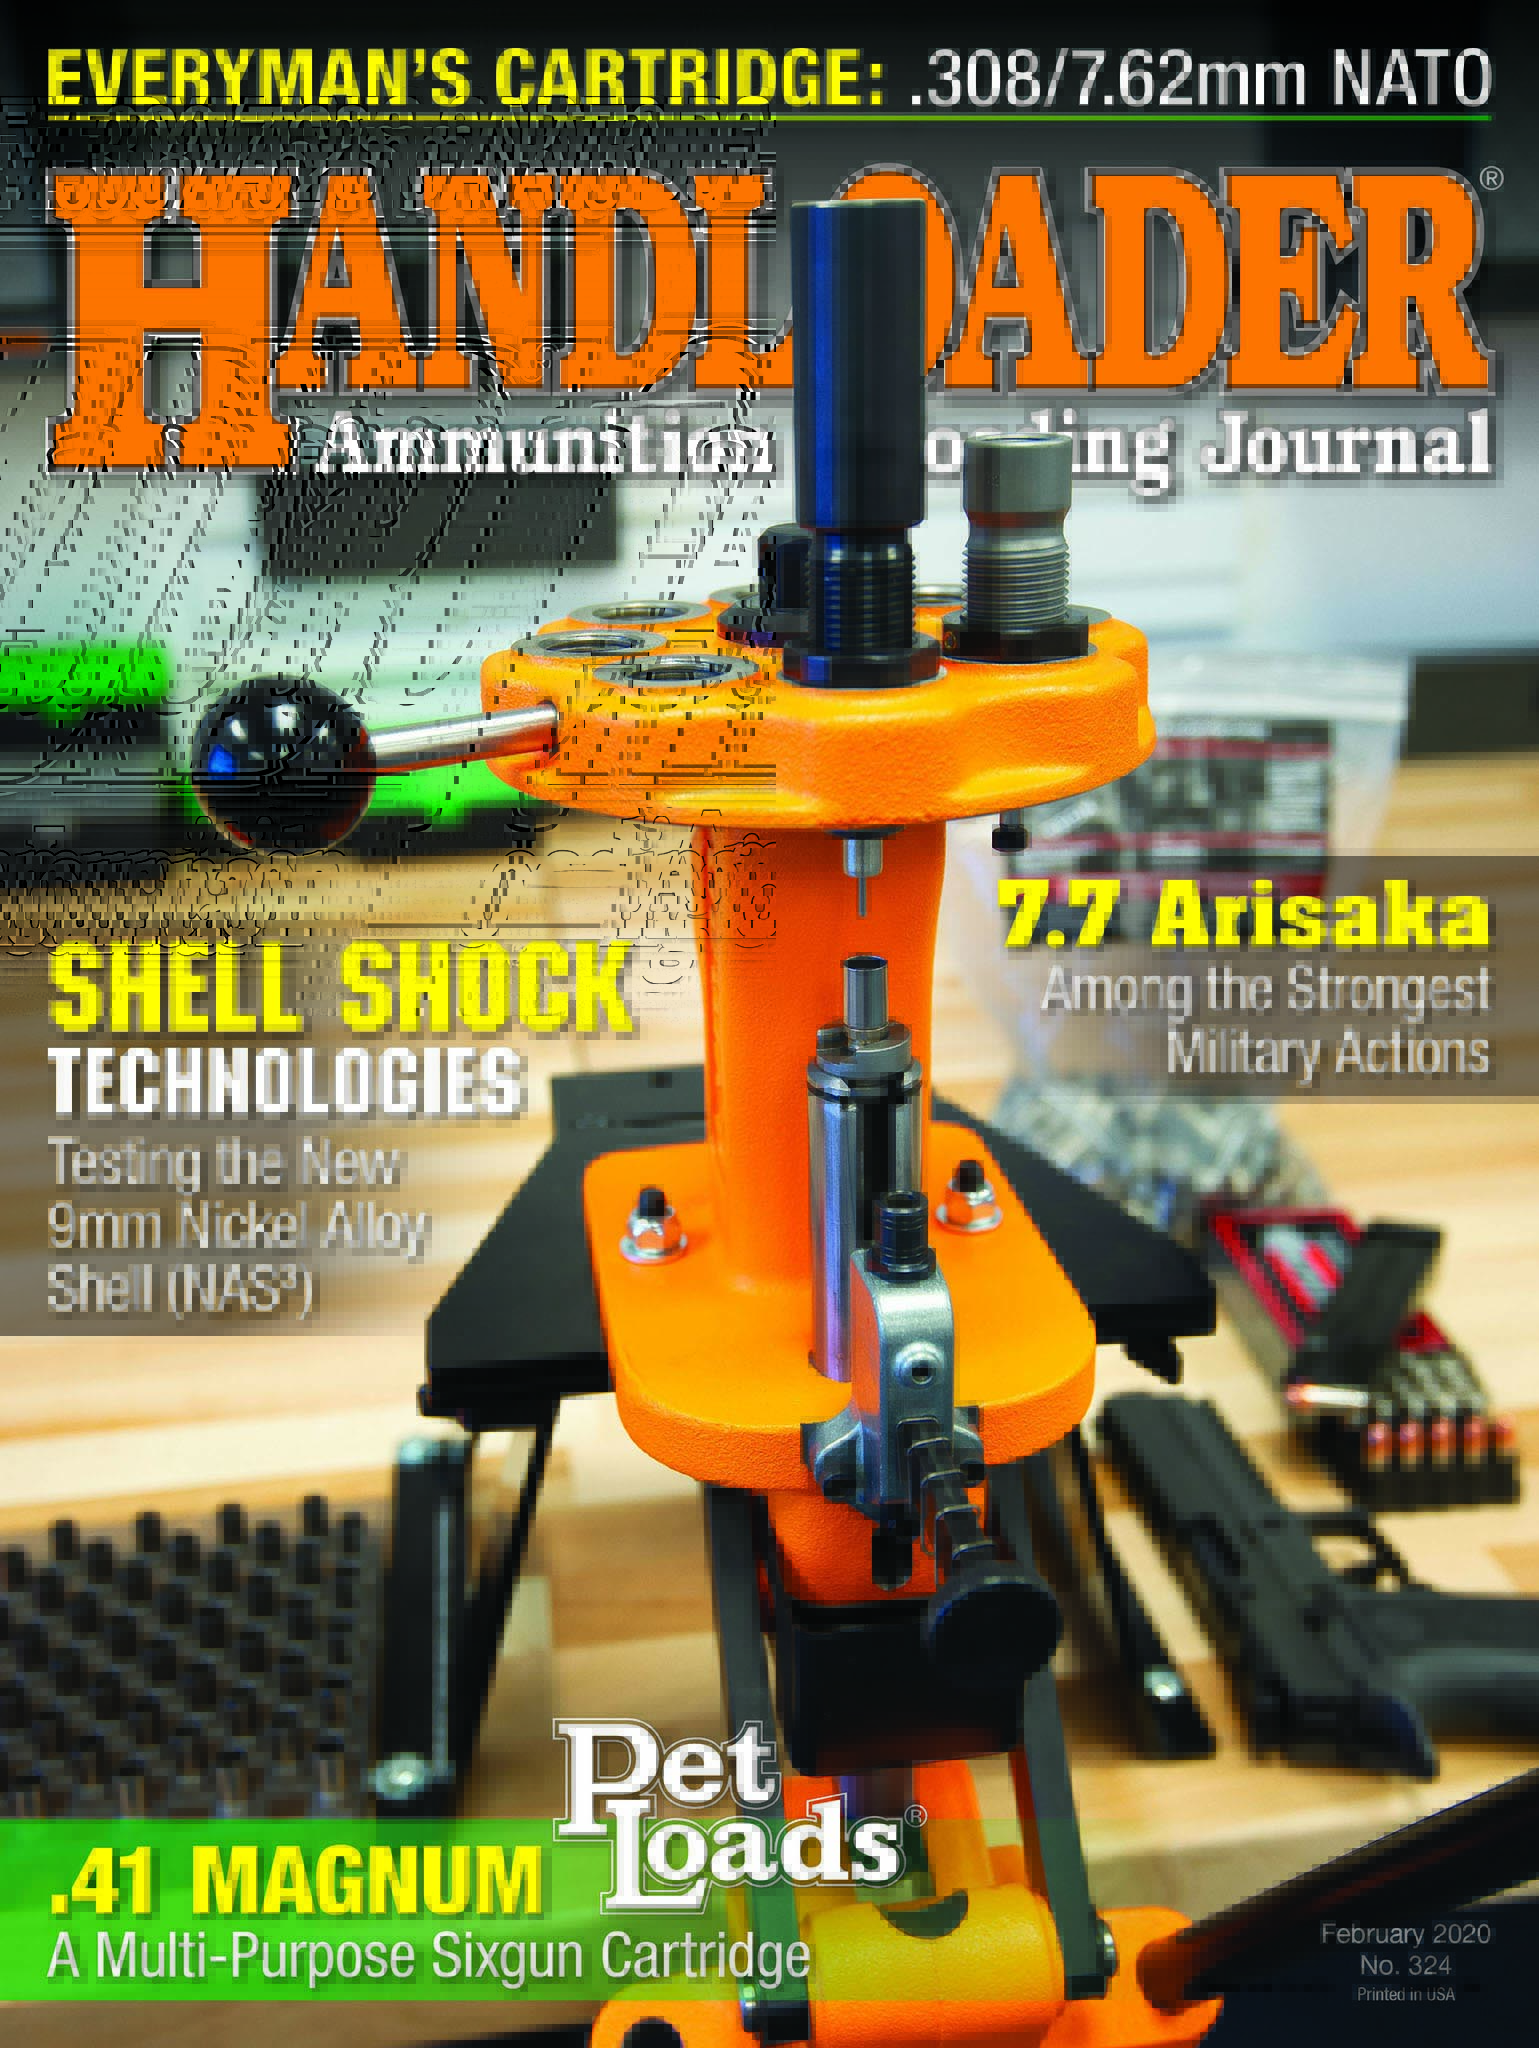 Handloader Magazine features Shell Shock Technologies’ NAS3 cases on the front cover